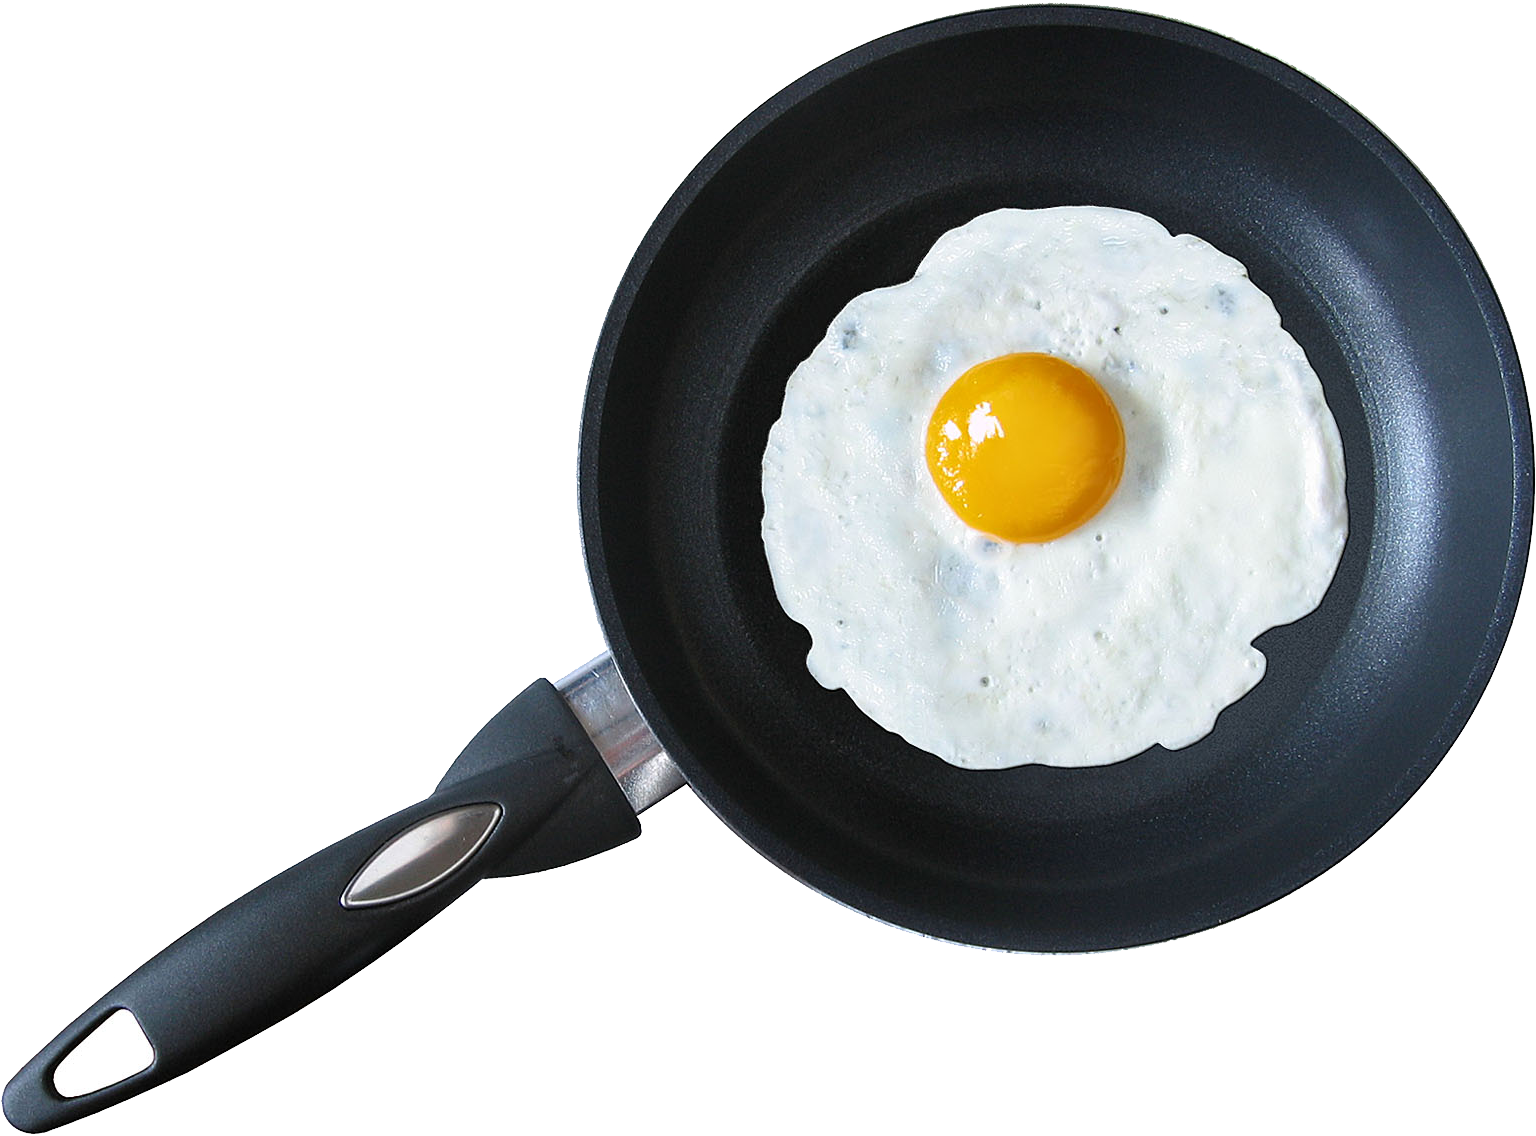 Fried egg png image. Fries clipart hot frying pan